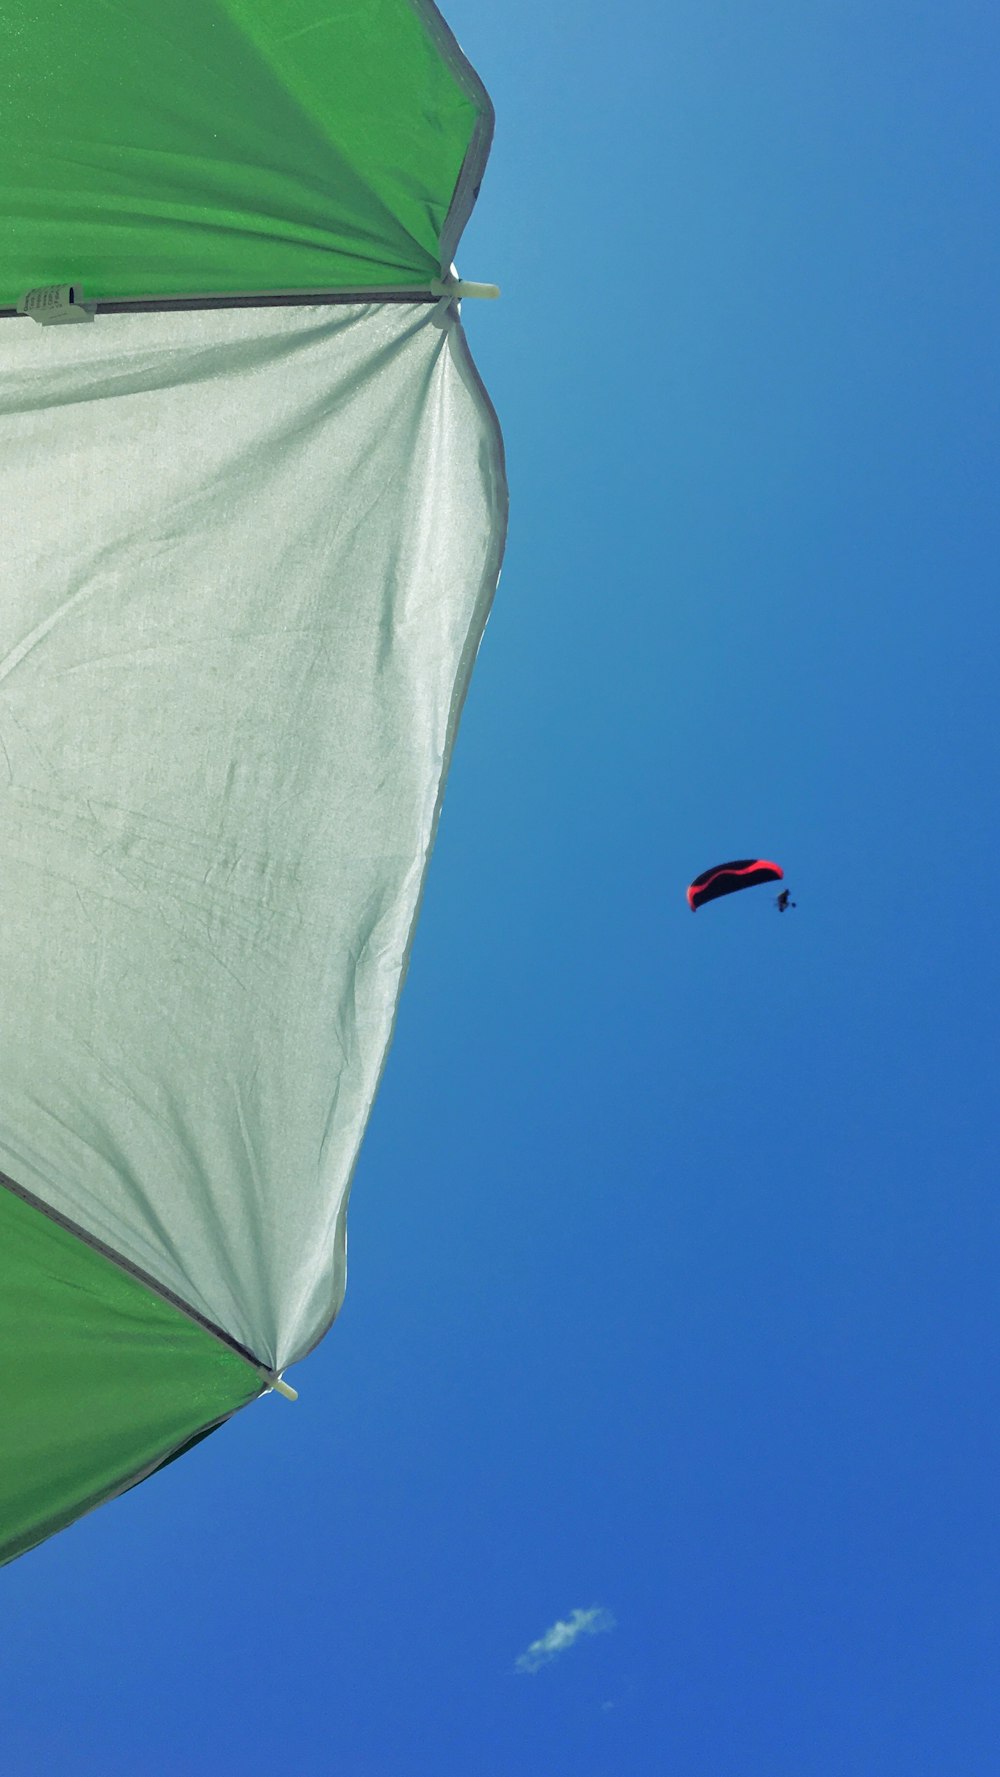 a parasail is flying high in the blue sky